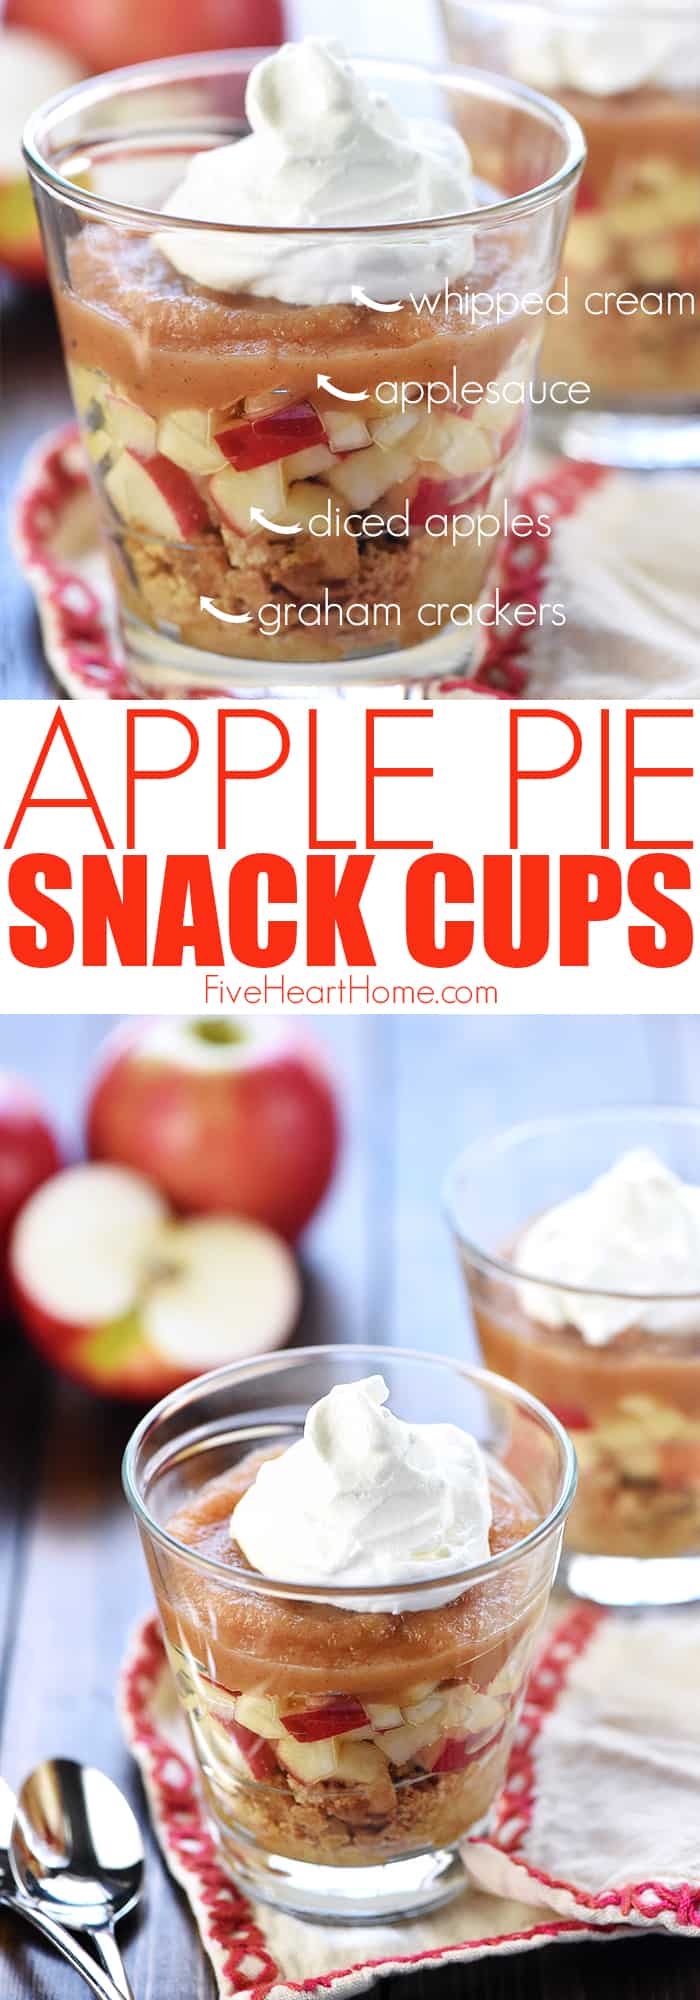 Healthy Apple Pie Snack Cups ~ layers of graham cracker crumbs, diced apples, cinnamon applesauce, and whipped cream make a wholesome after-school snack or dessert that tastes just like apple pie! | FiveHeartHome.com via @fivehearthome